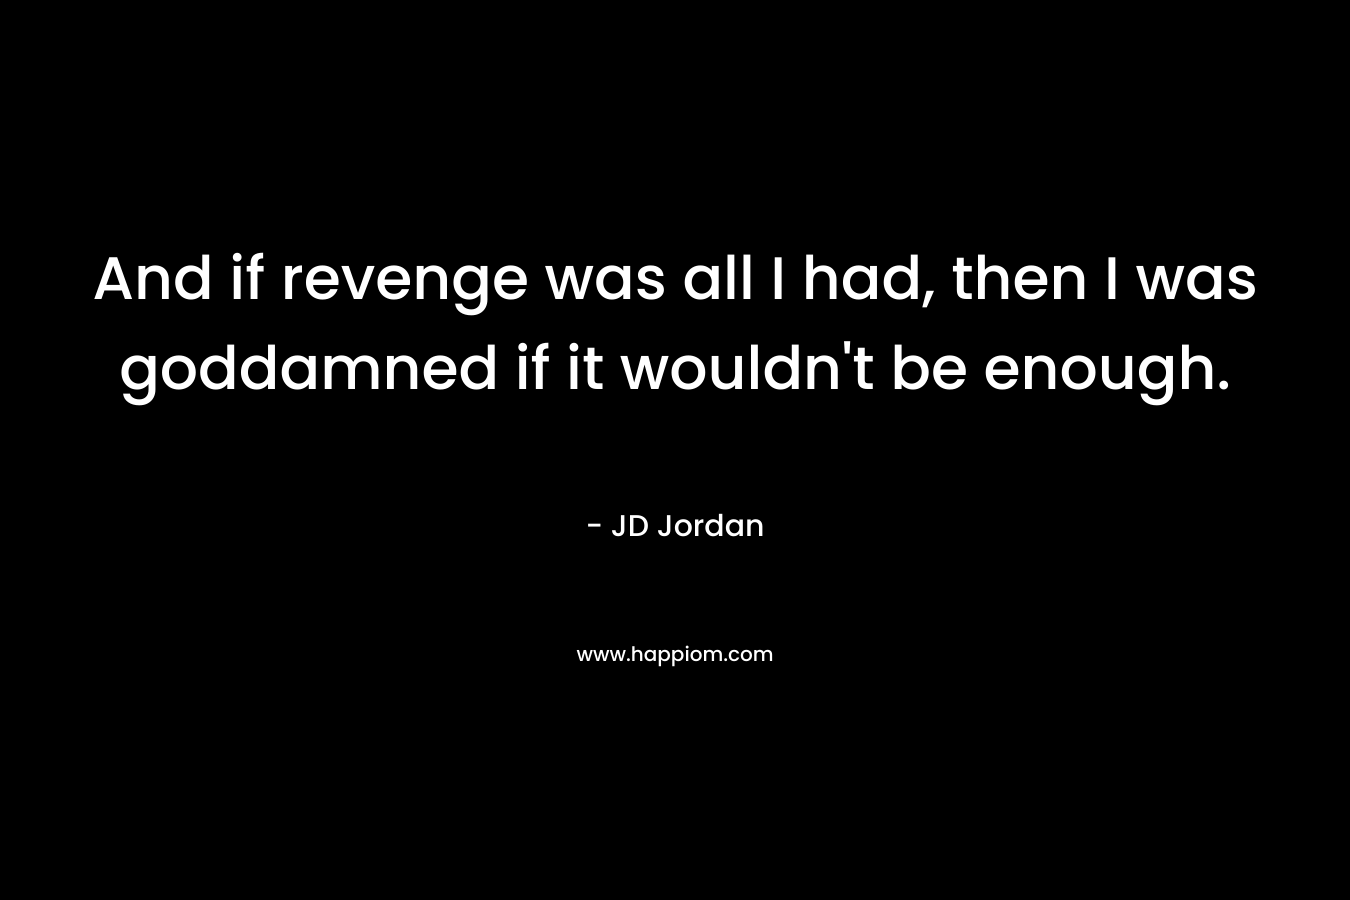 And if revenge was all I had, then I was goddamned if it wouldn't be enough.